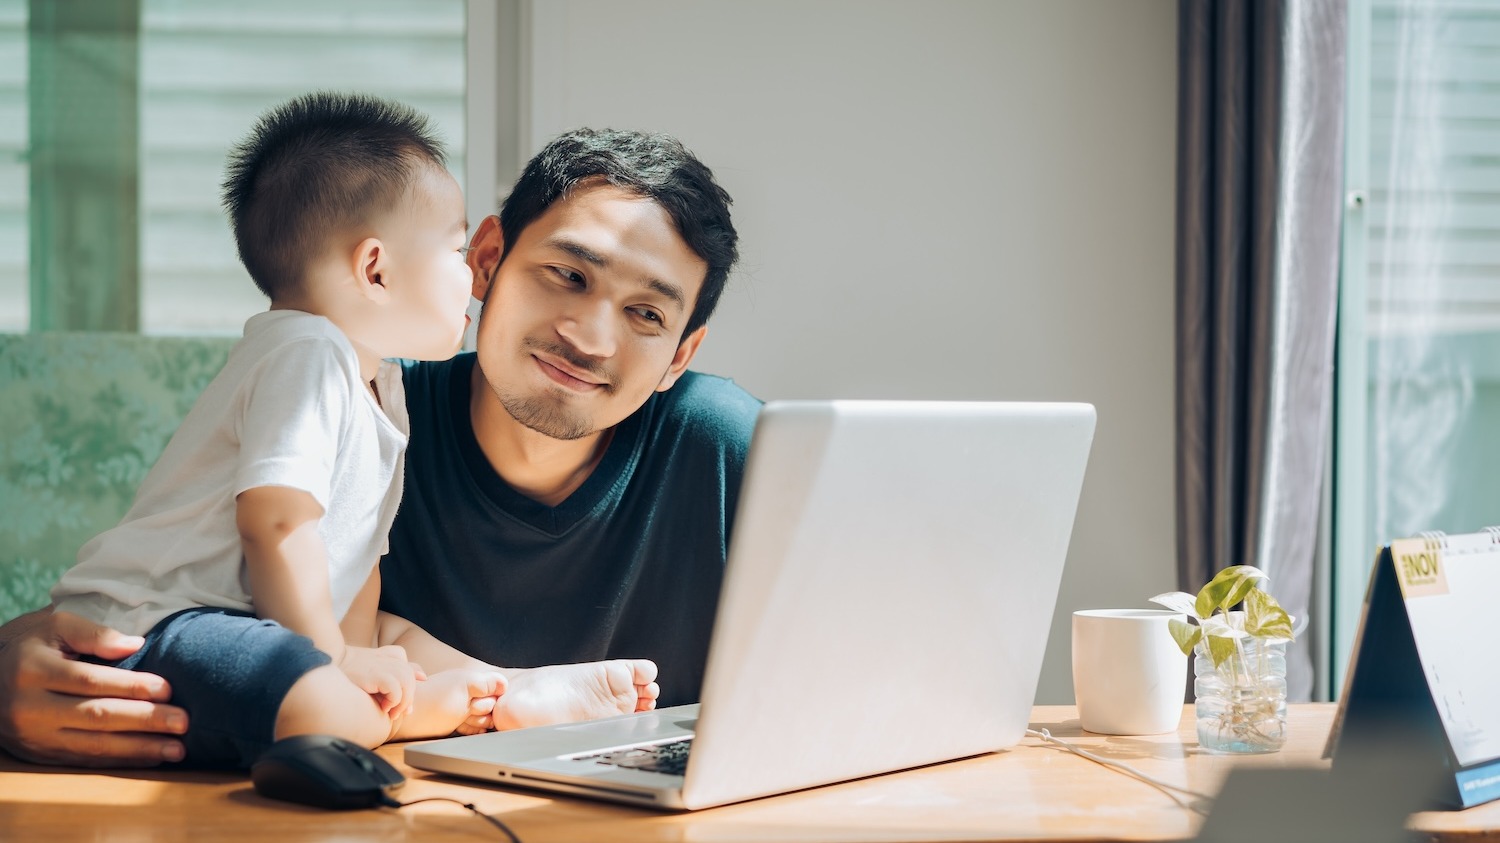 Asian dad receives a kiss from infant while working on laptop